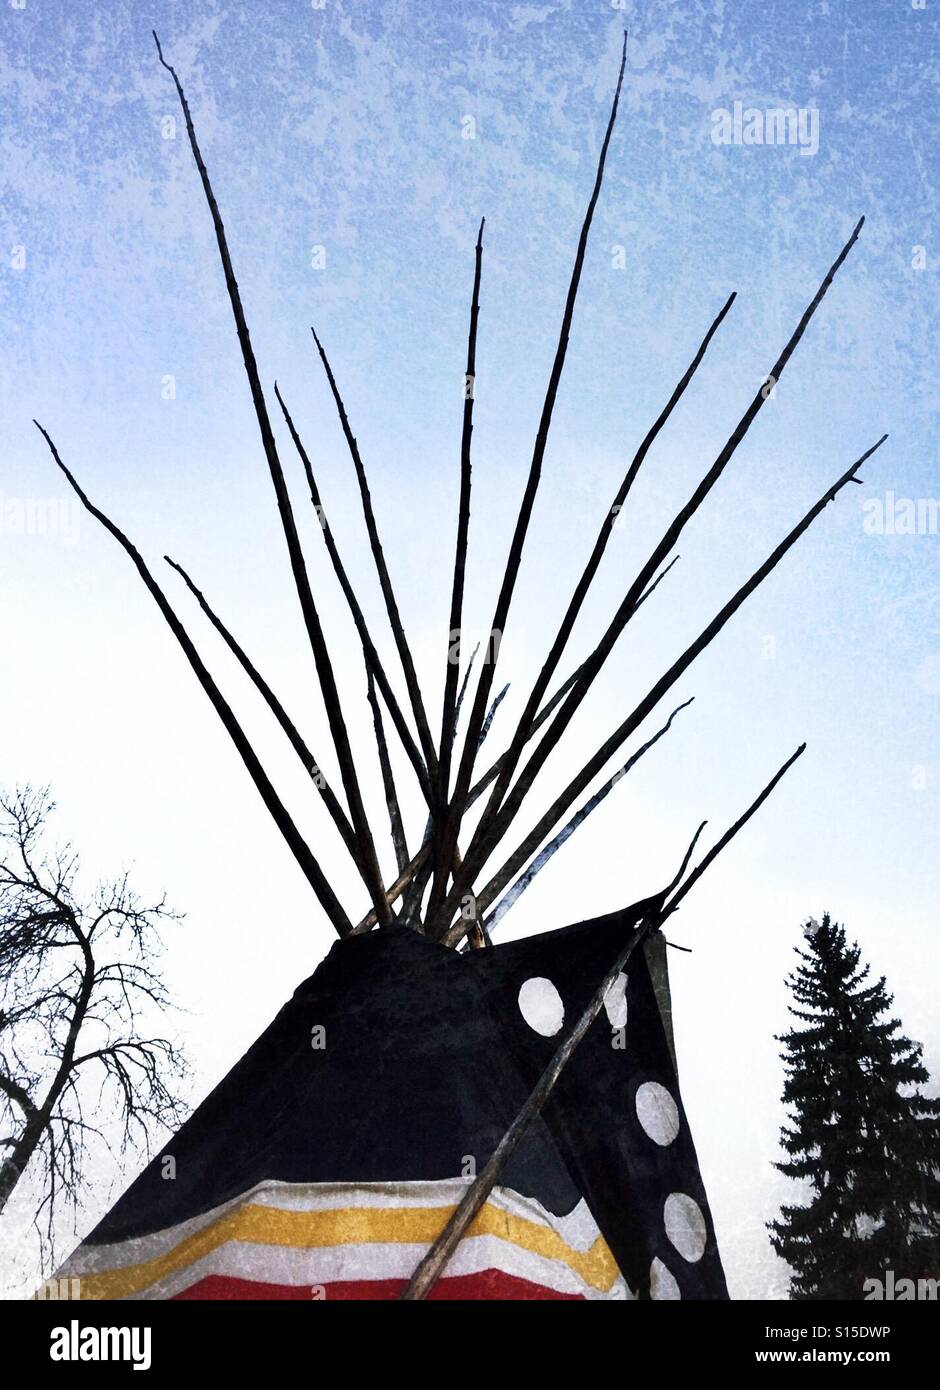 The top of a First Nations teepee. Stock Photo